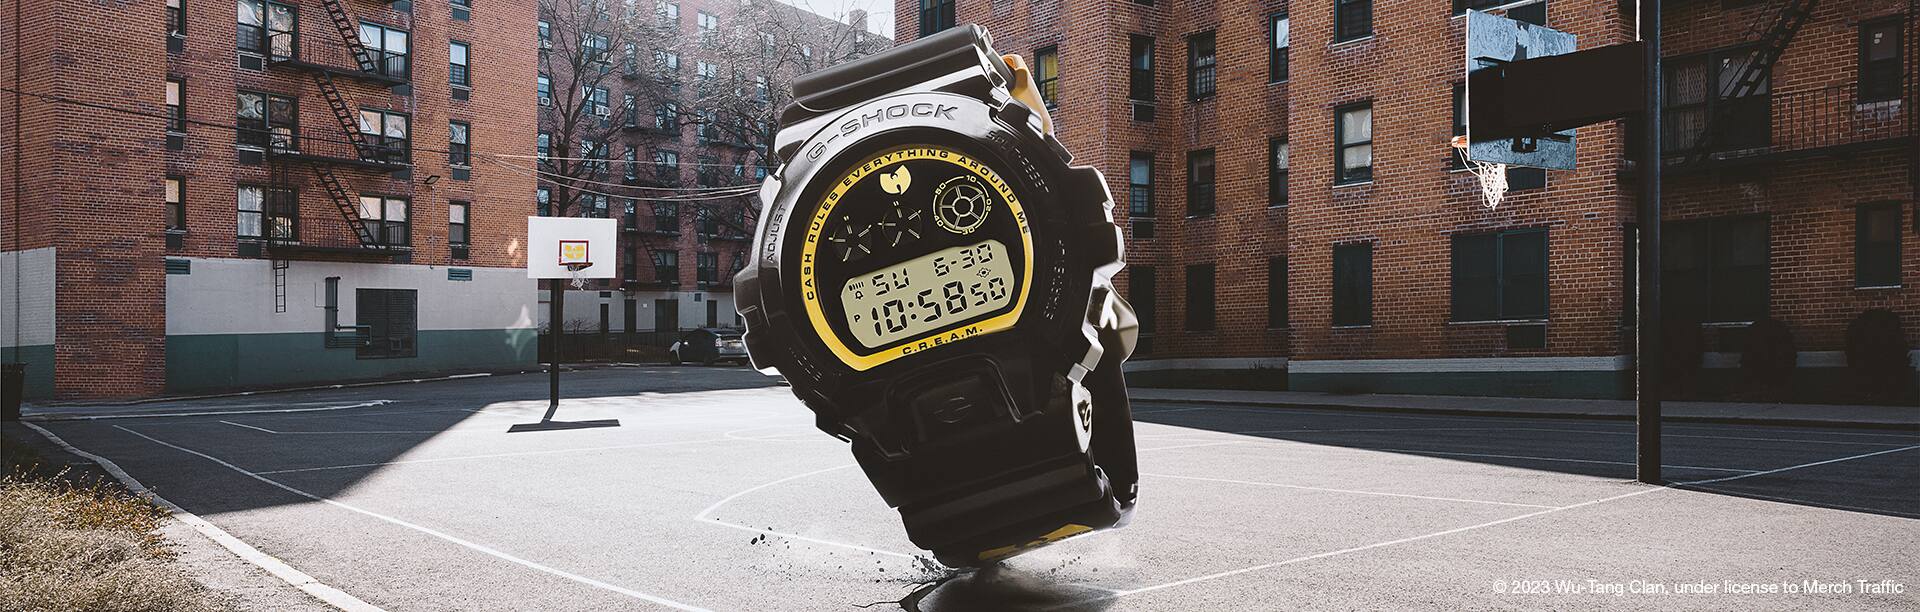 Wu-Tang watch in the foreground and NYC basketball court and apartment building in the background